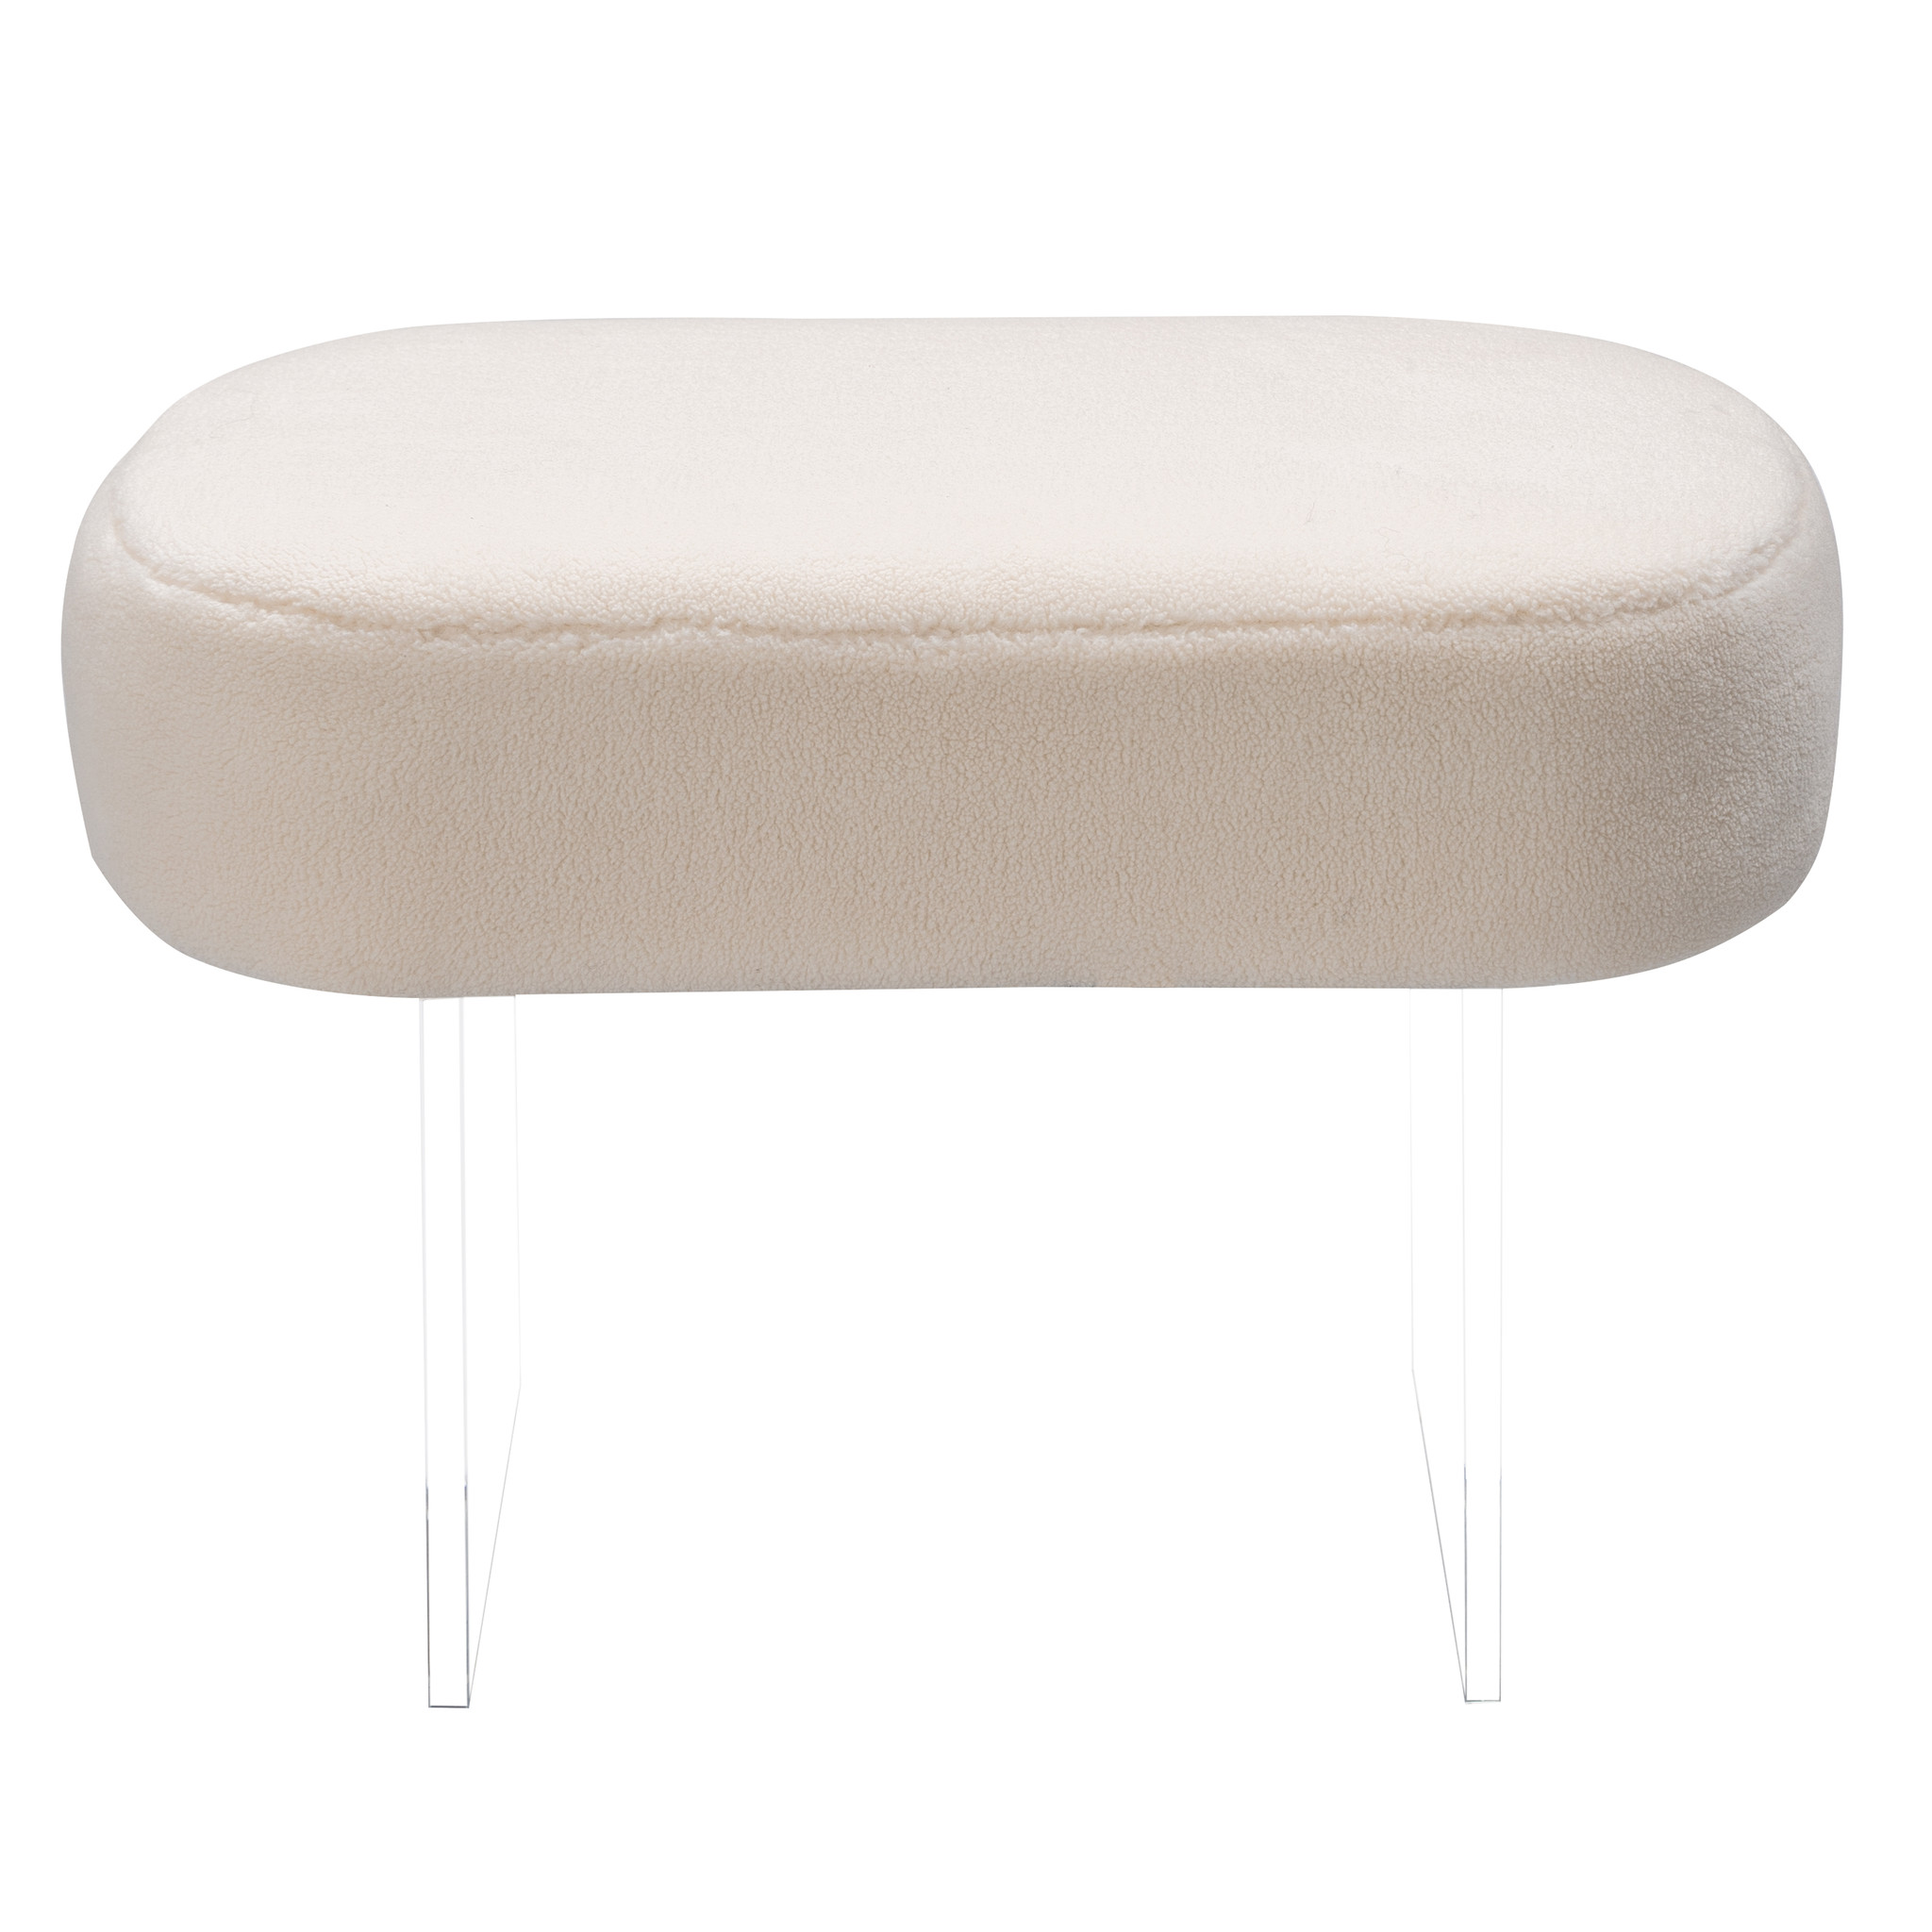 safavieh couture sheared faux fur oval racetrack shape ivory white lucite acrylic leg modern ottoman make up stool bench